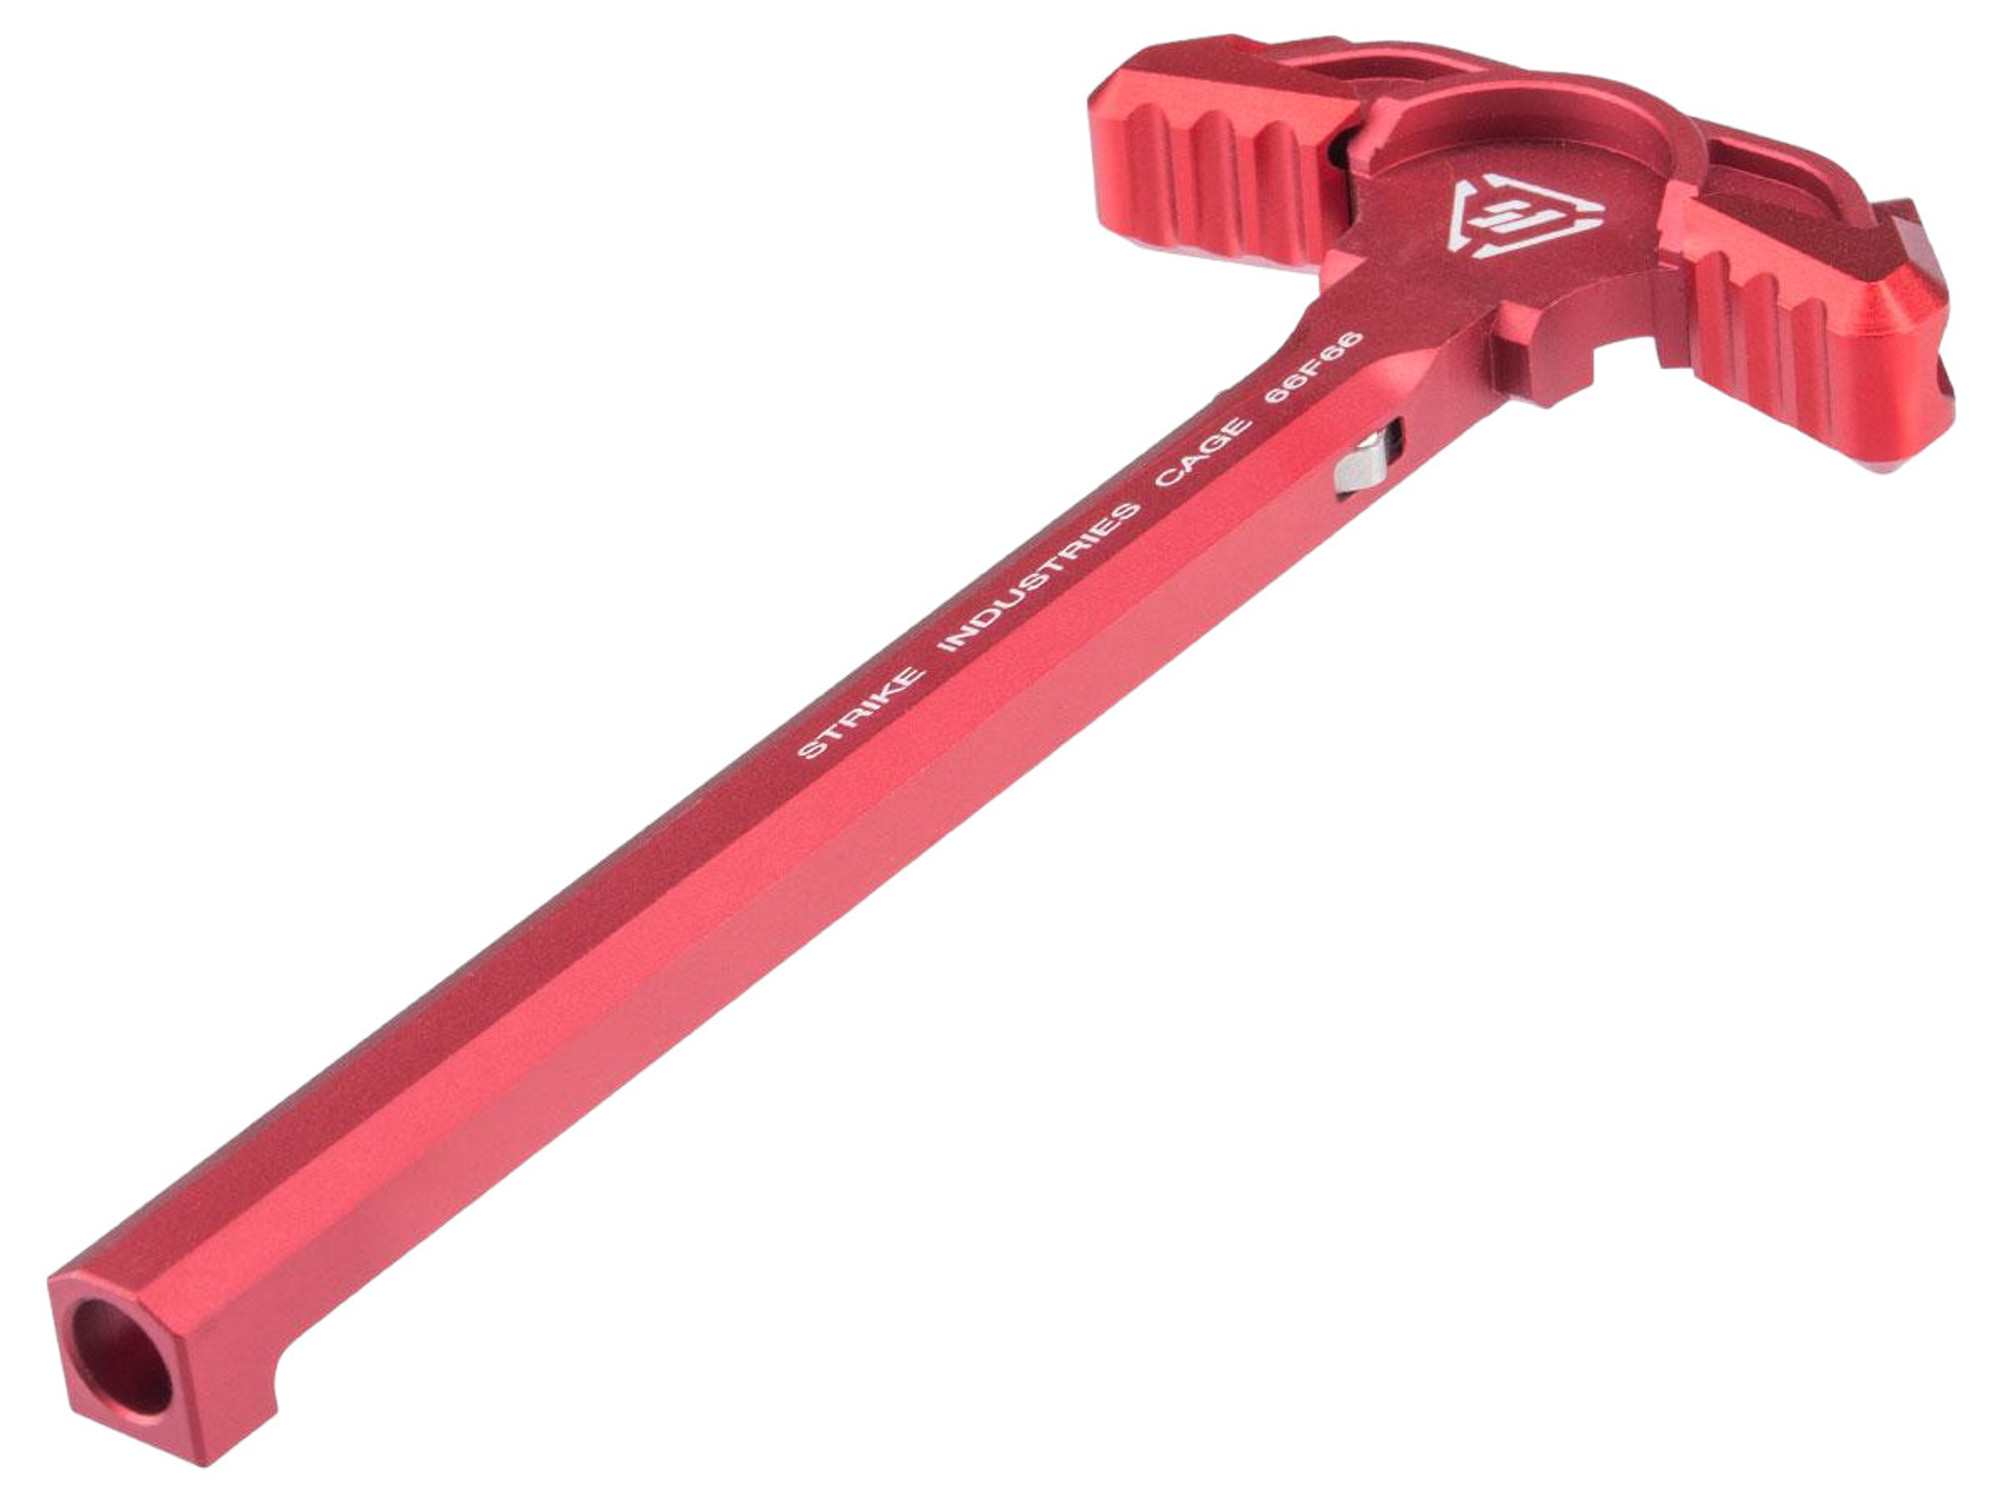 EMG Helios x Strike Industries Latchless Charging Handle for MWS Gas Blowback M4/M16 Airsoft Rifles (Color: Red)